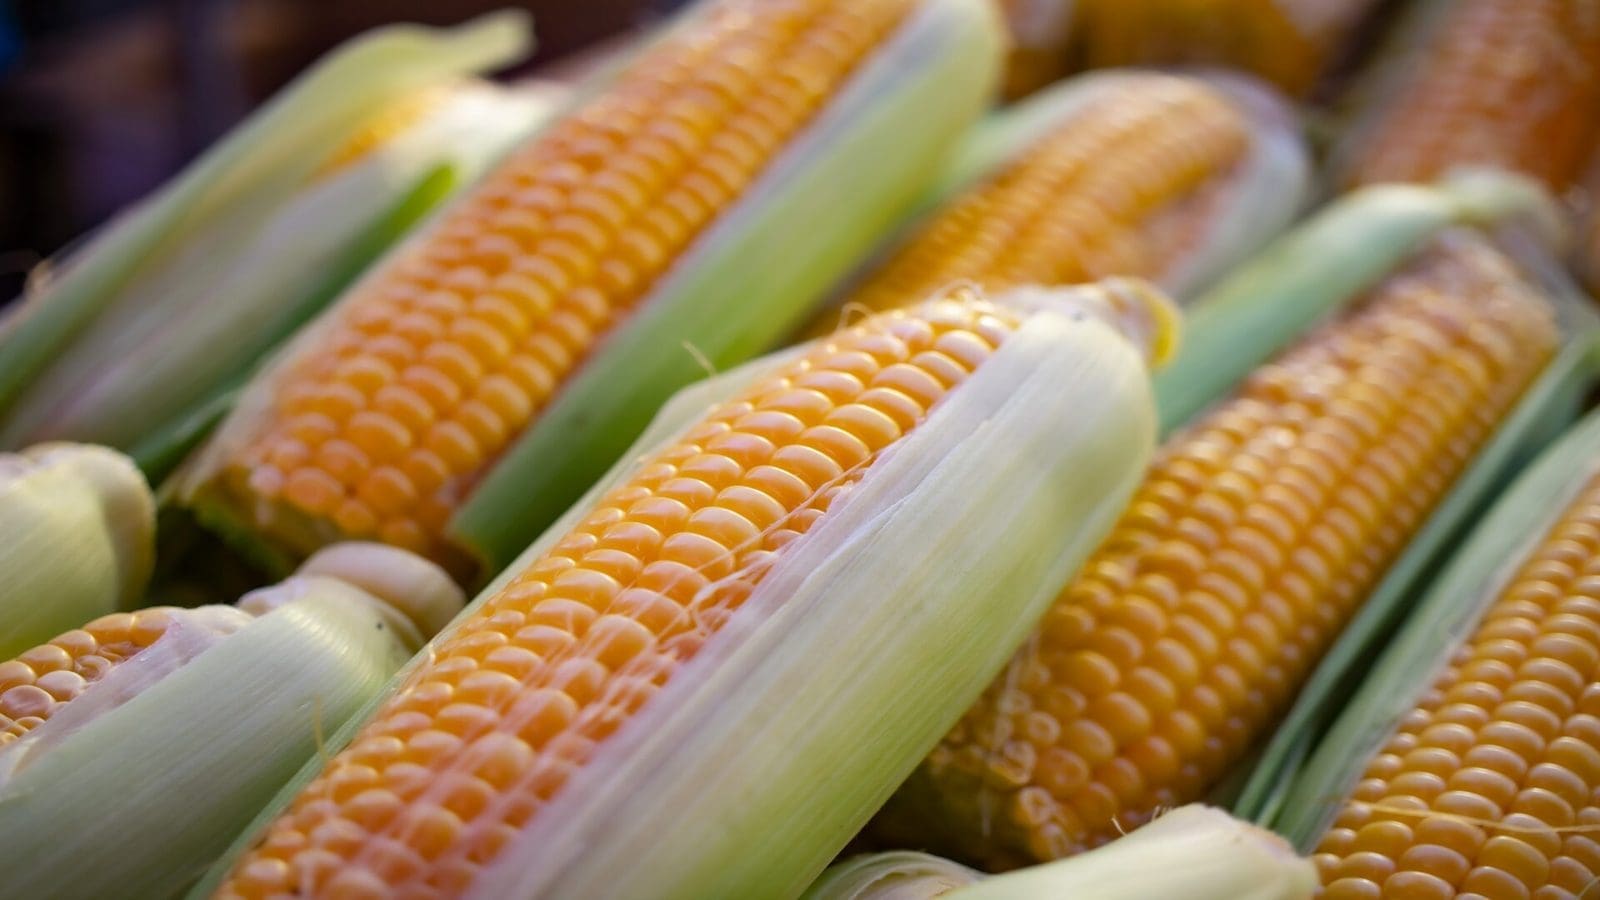 US Trade Representative (USTR) requests talks with Mexico on GM corn import dispute